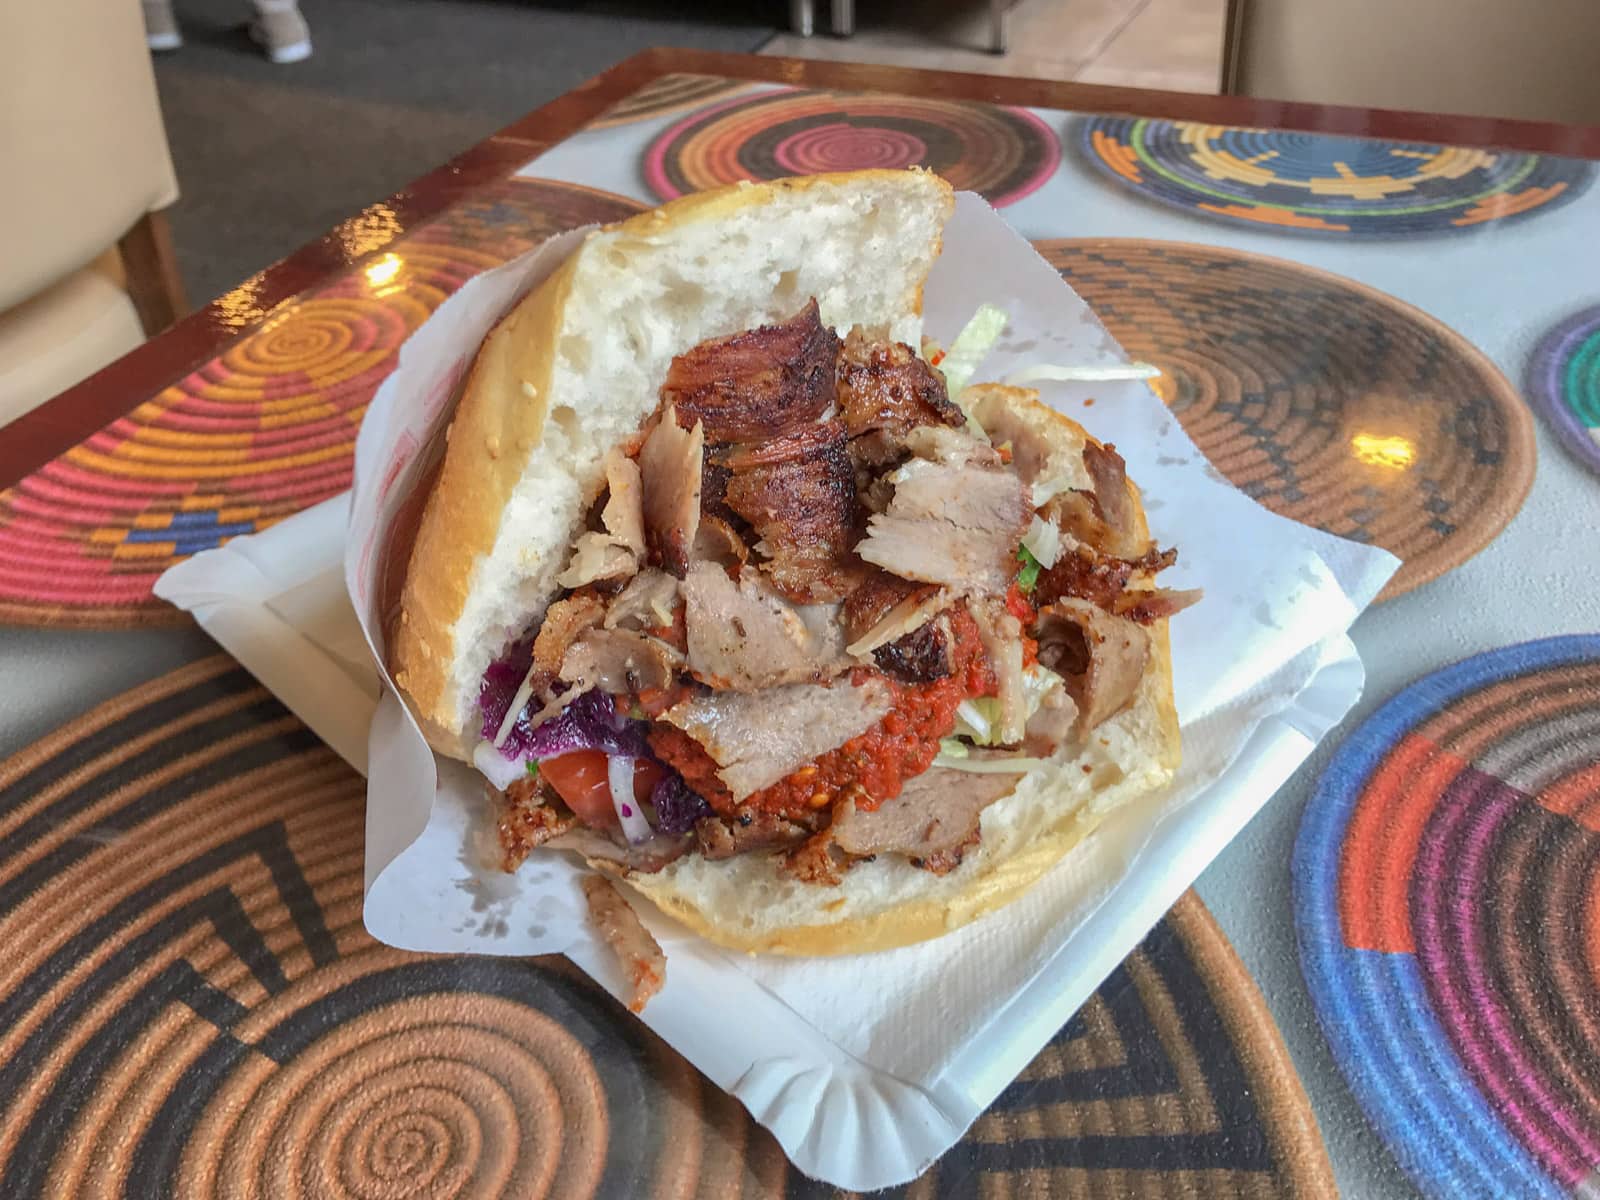 A kebab sandwich filled with pieces of beef and cabbage, on a table with a colourful print